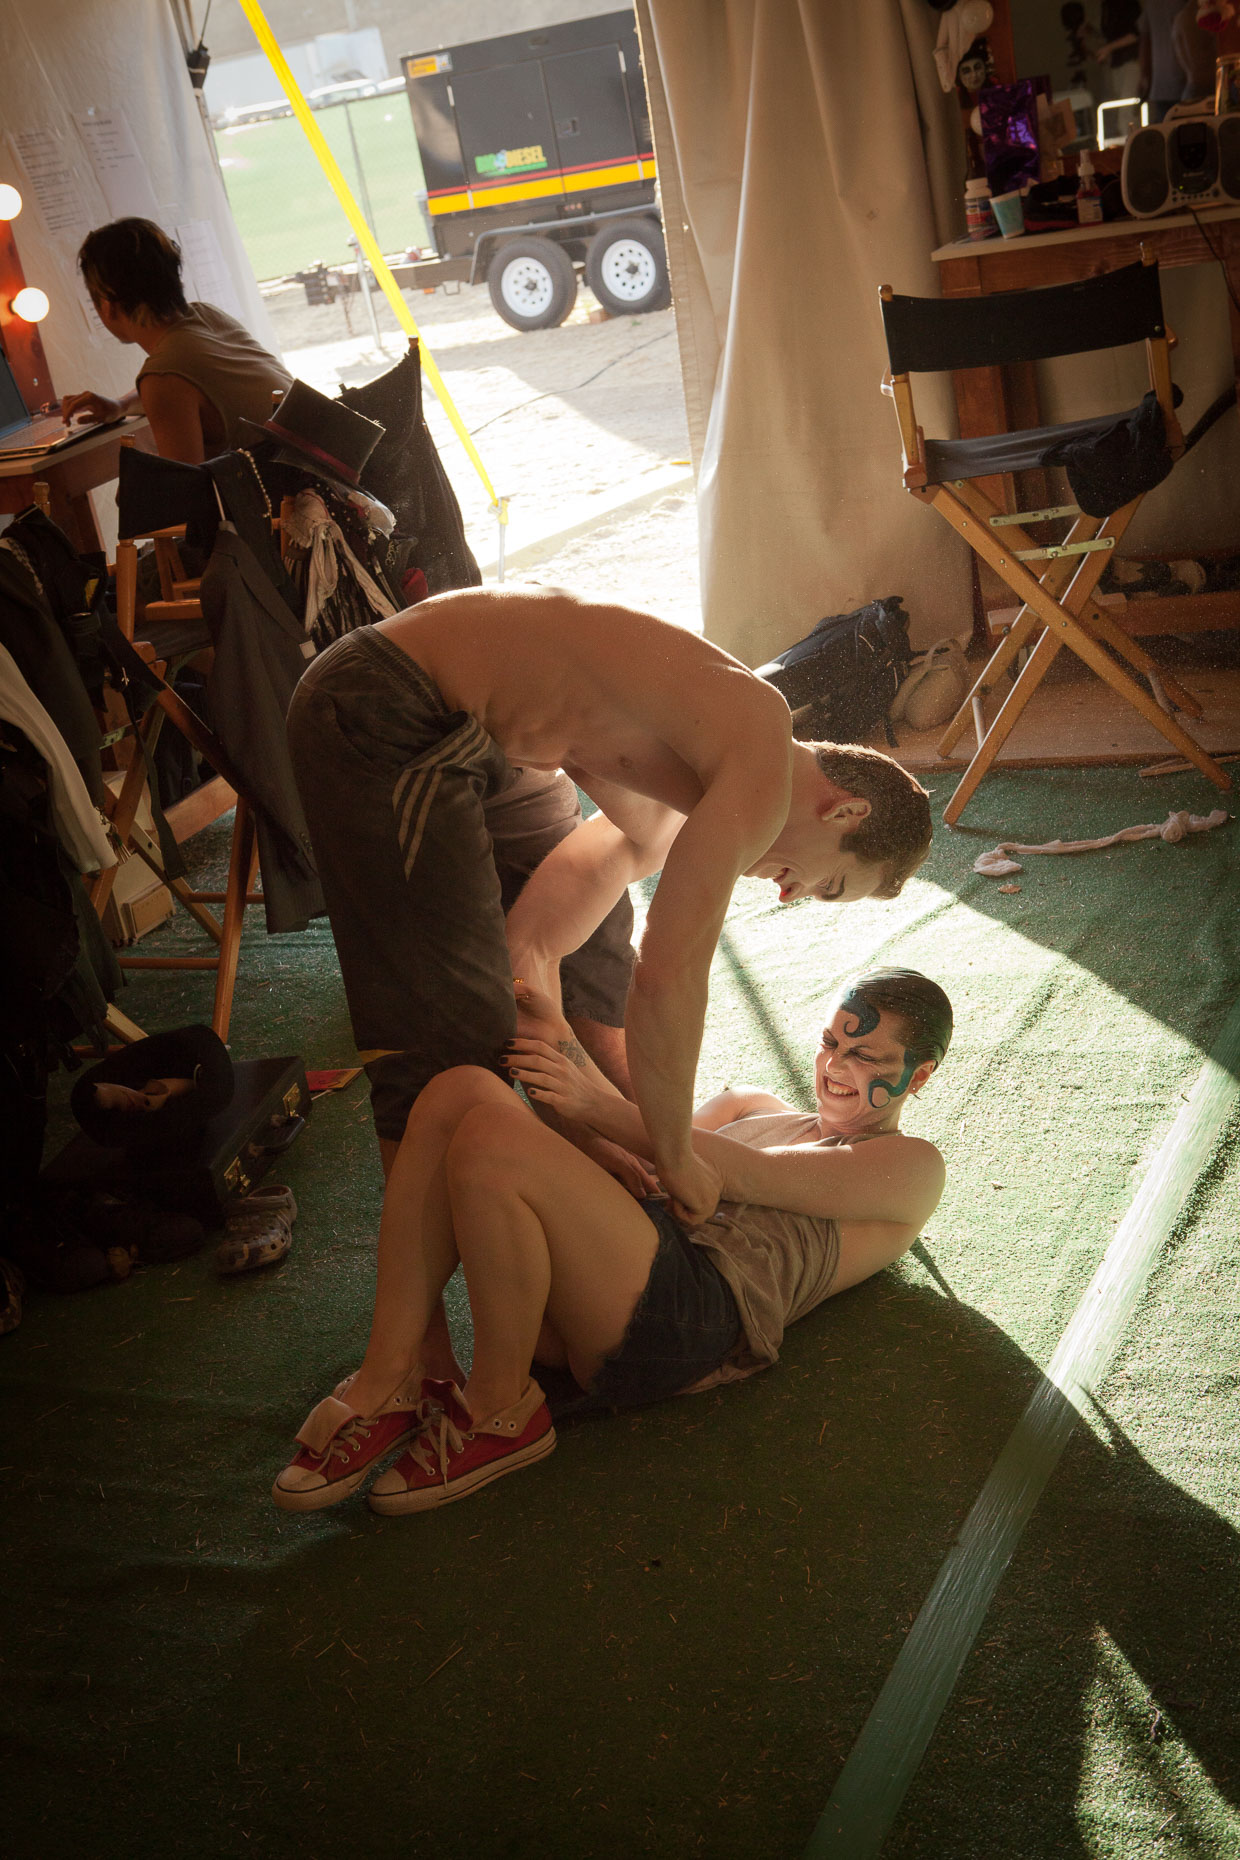 Performers in makeup tickle each other backstage at Cirque Berzerk circus performers, by David Zaitz